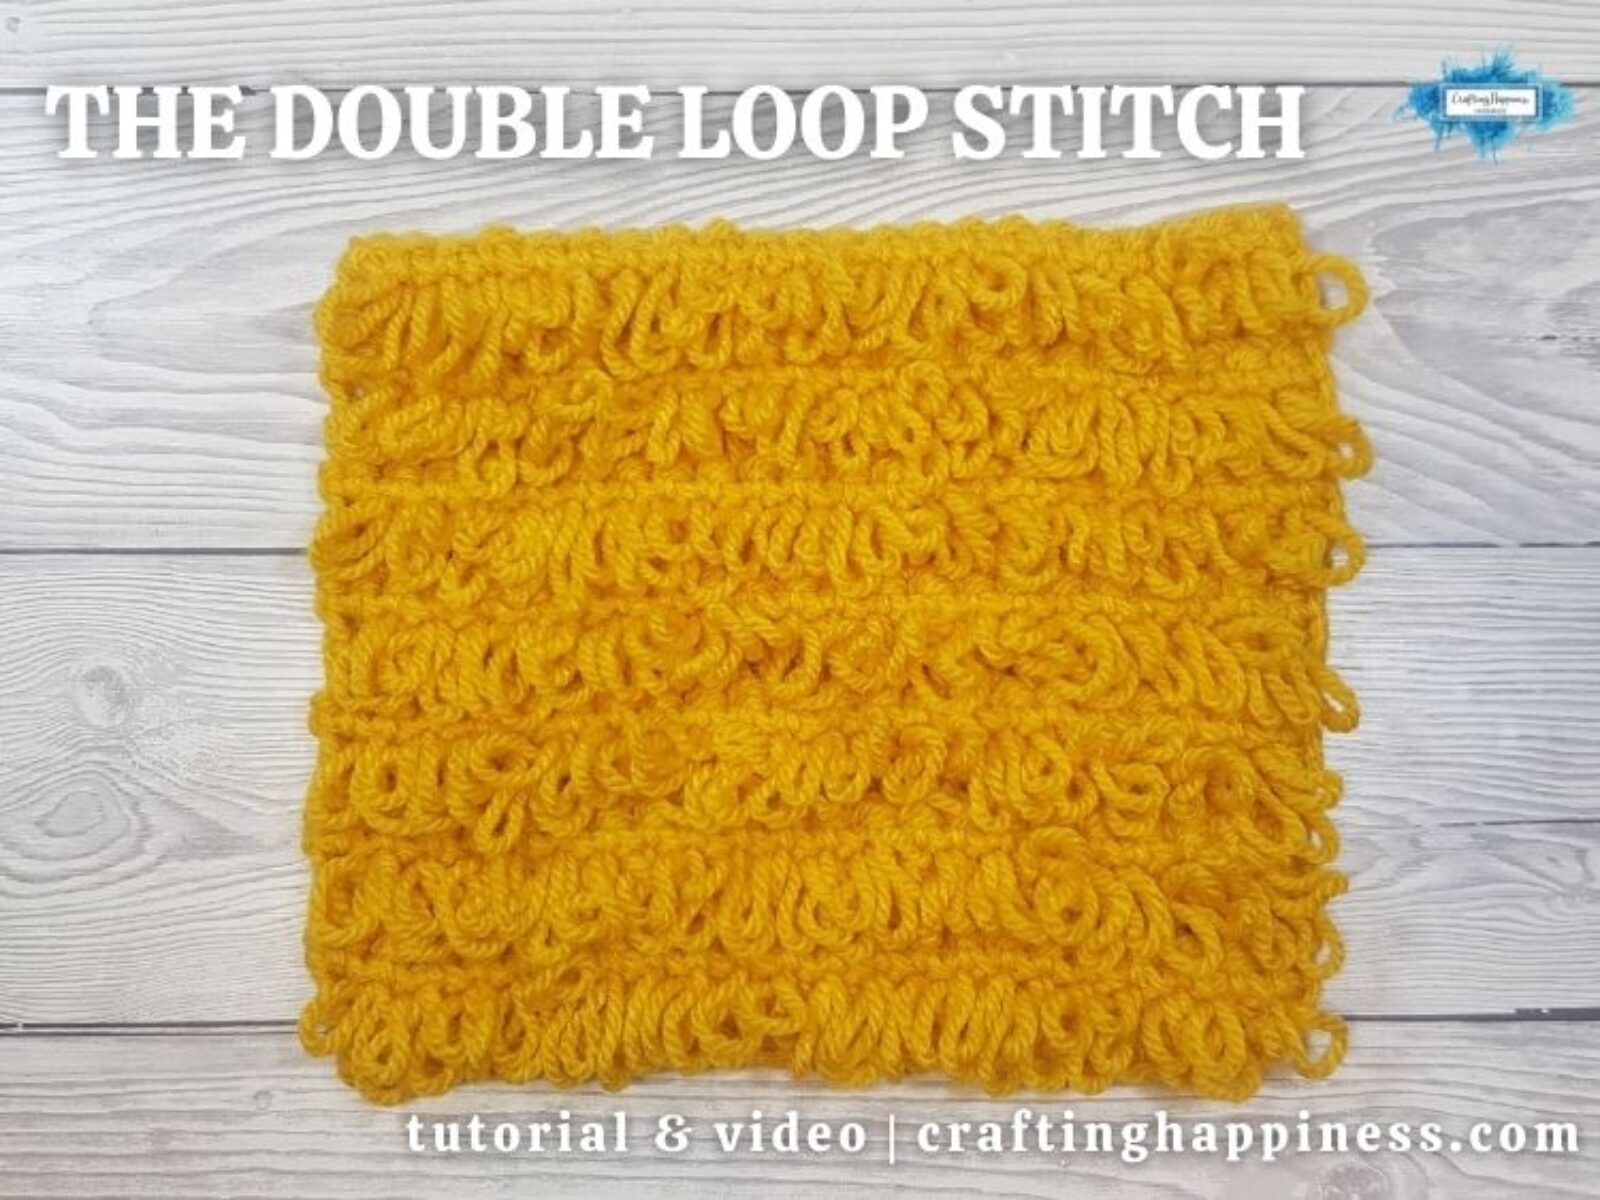 FB BLOG POSTER - The Double Loop Stitch